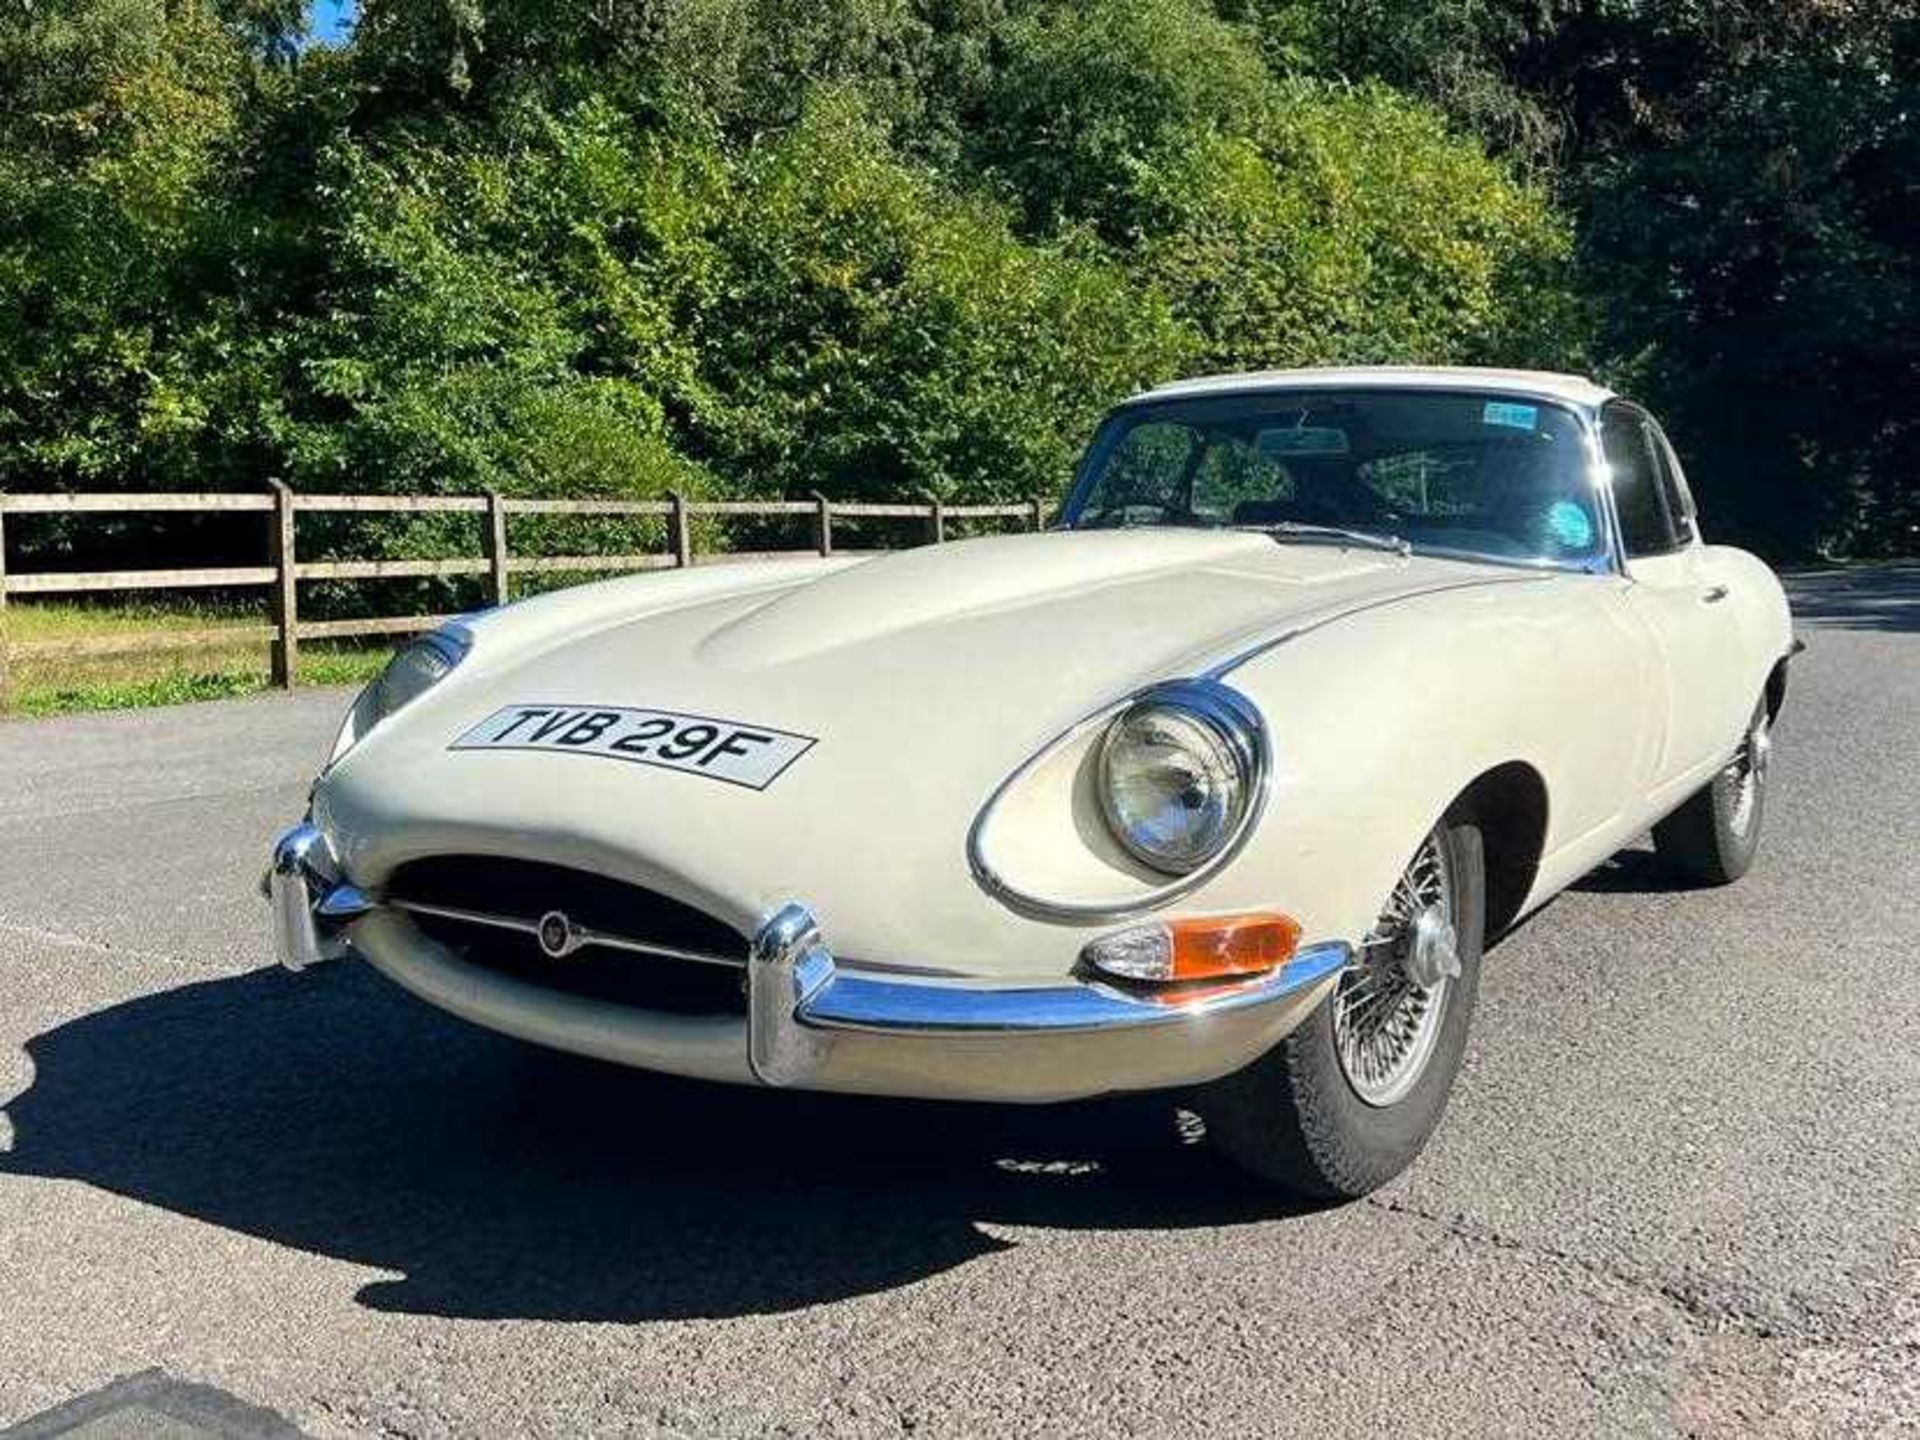 1968 Jaguar E-Type 4.2 Coupe Current ownership for more than 28 years - Image 2 of 24